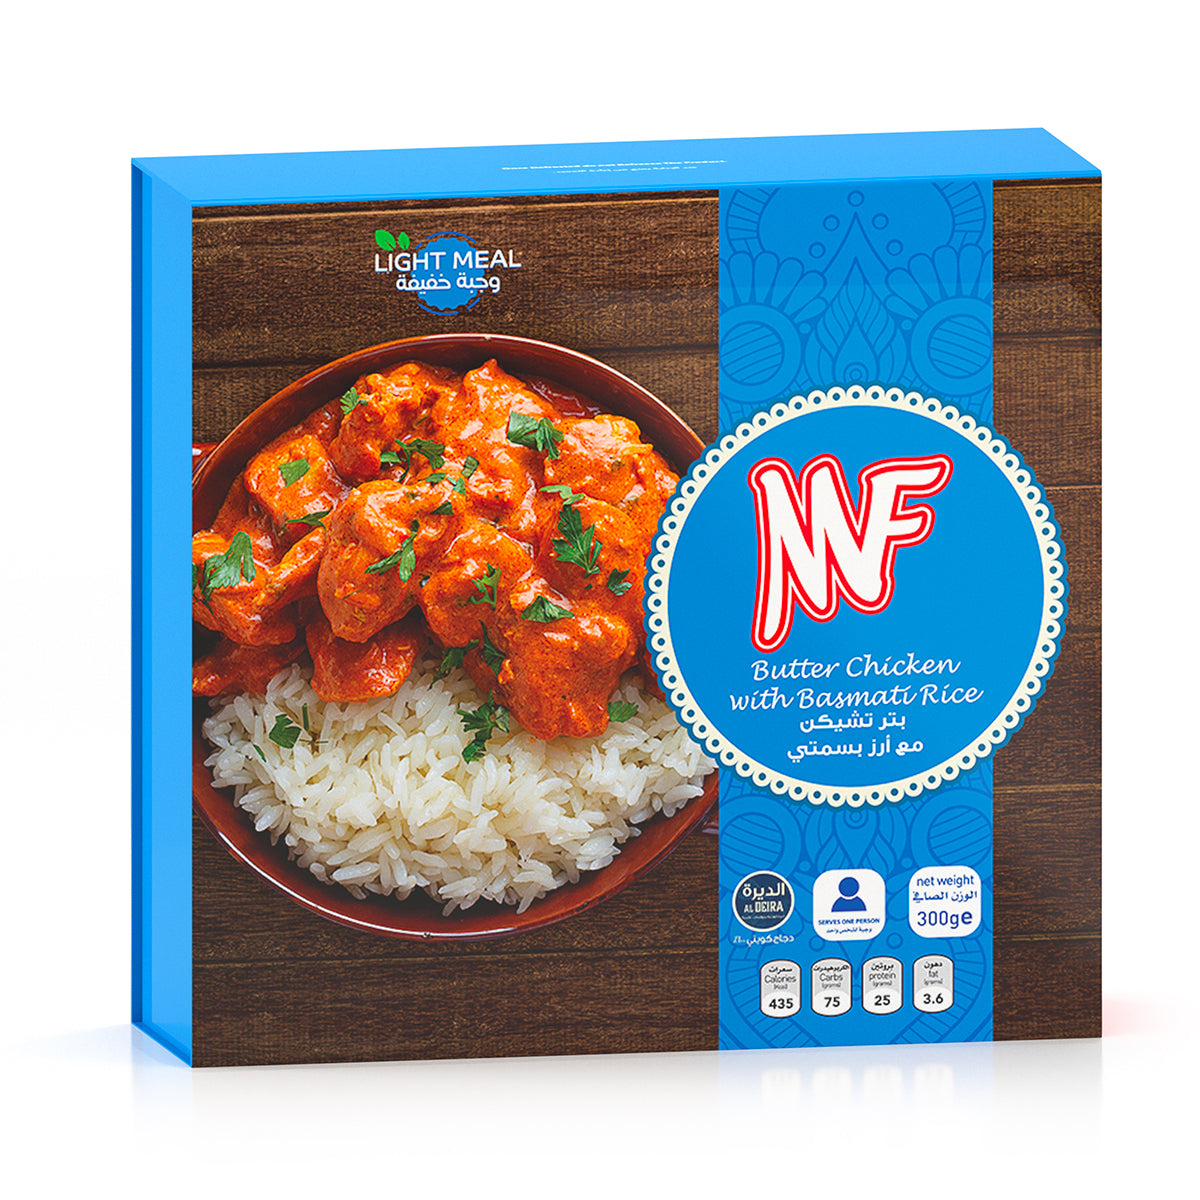 MF Butter Chicken with Basmati Rice 300g (Light Meal)